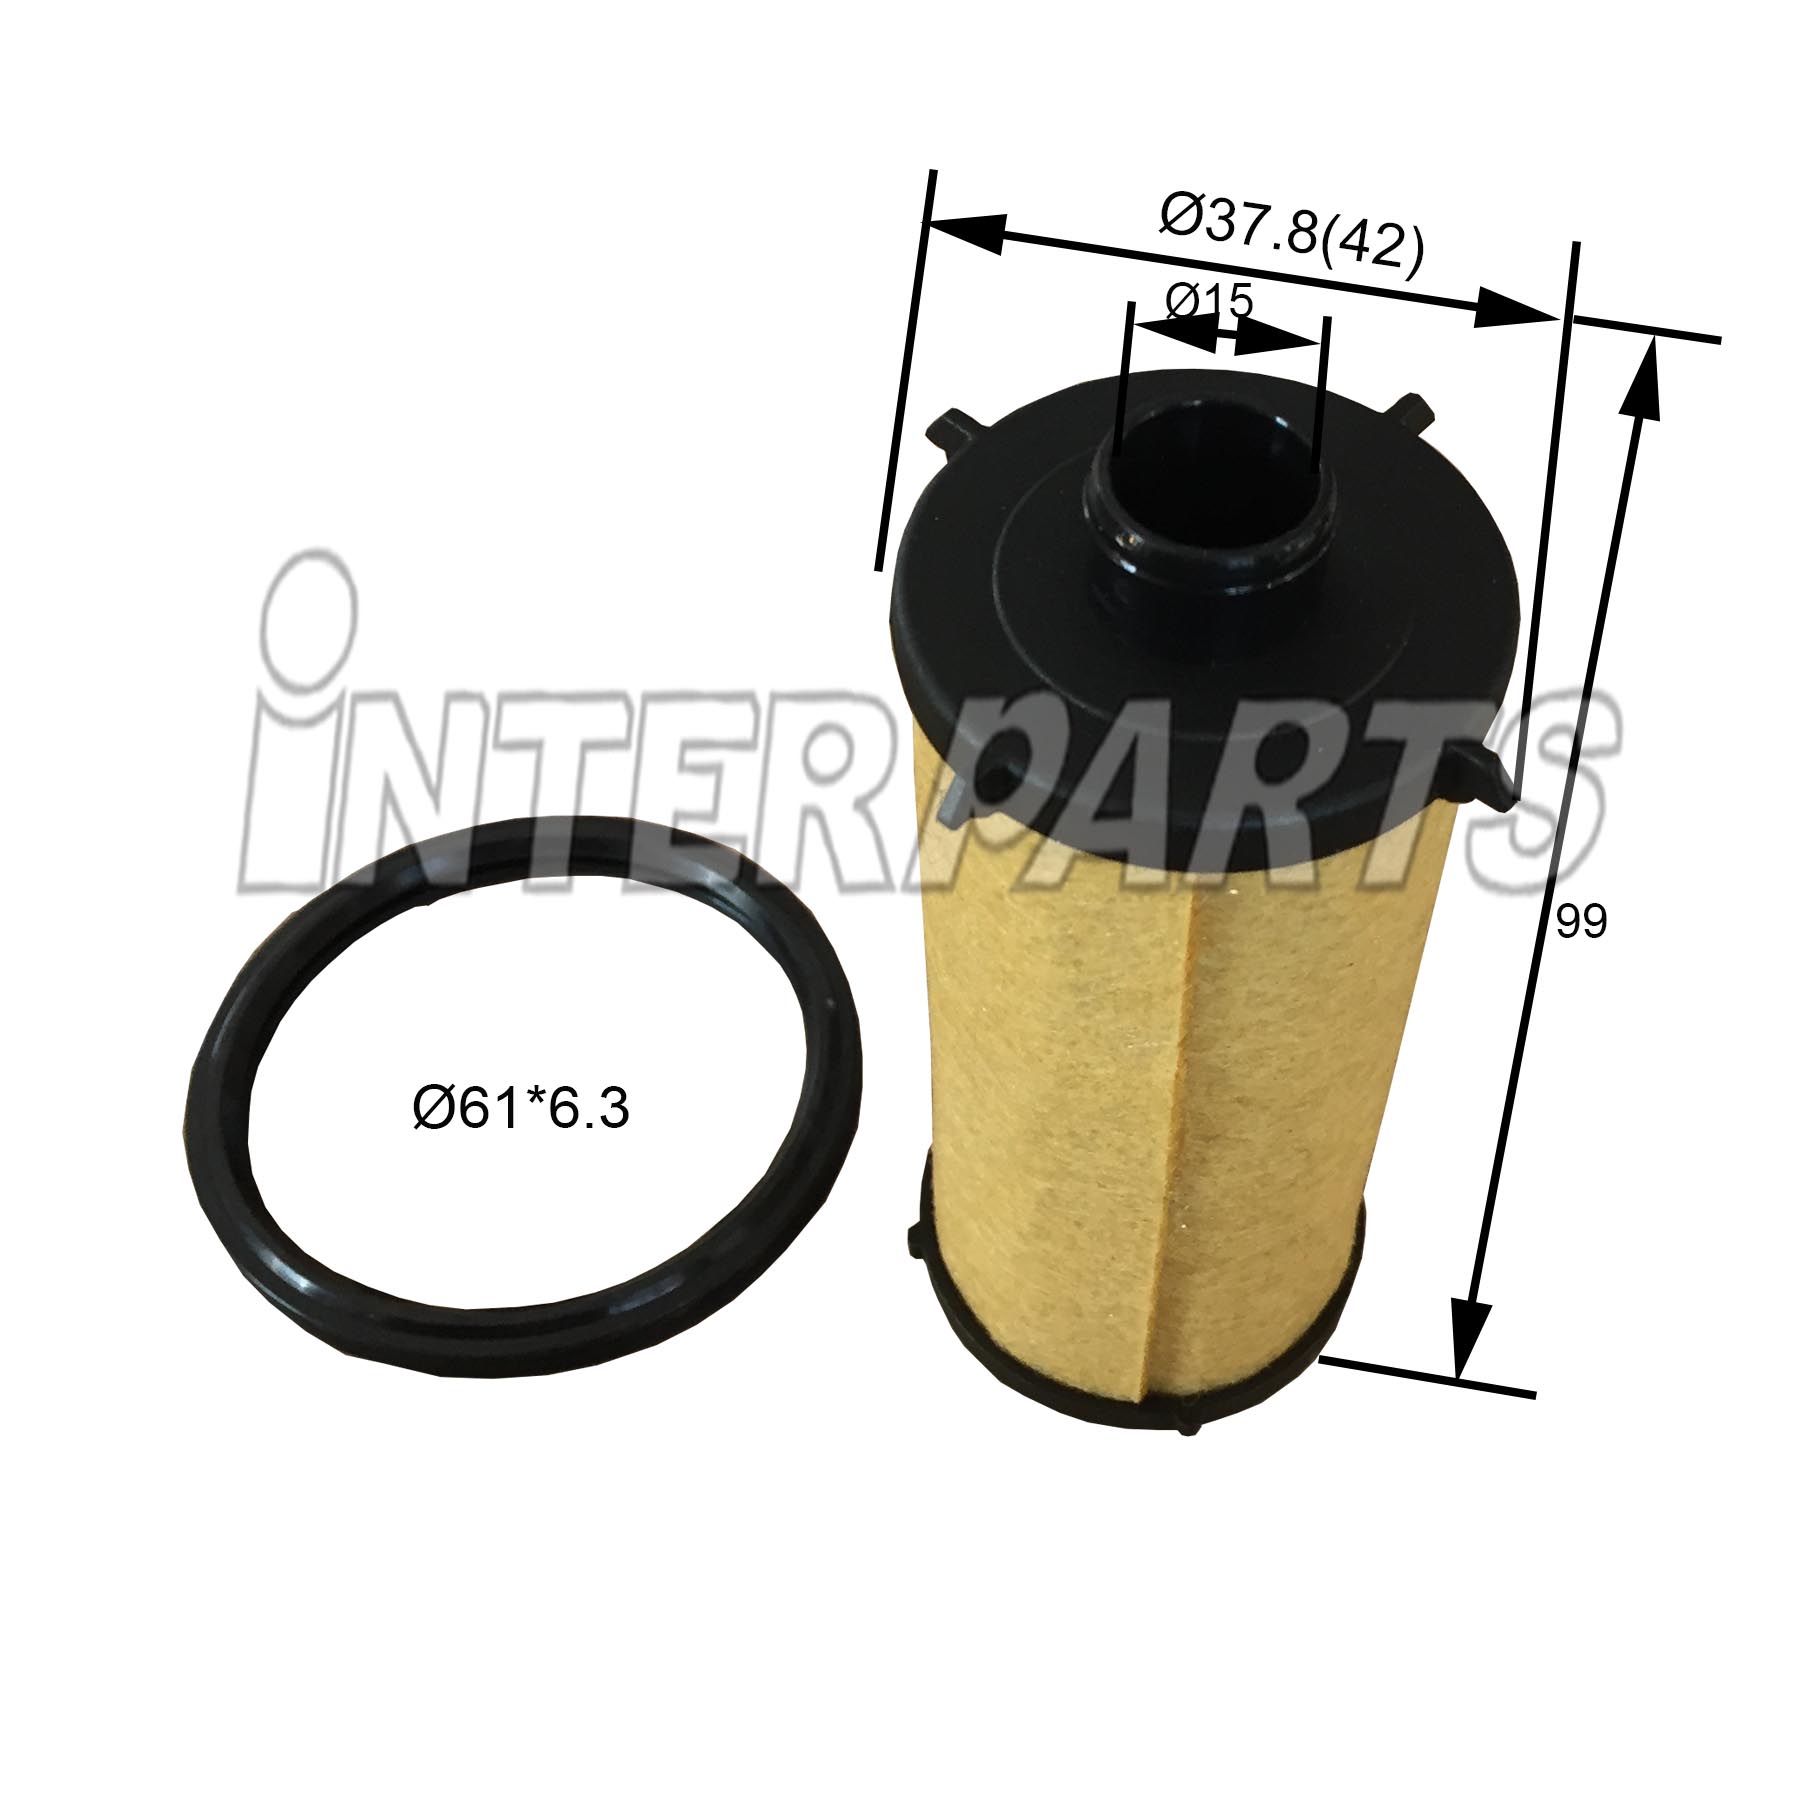 MERCEDES BENZ 호환 TRANSMISSION FILTER A2463772300 IPTS-E168AS